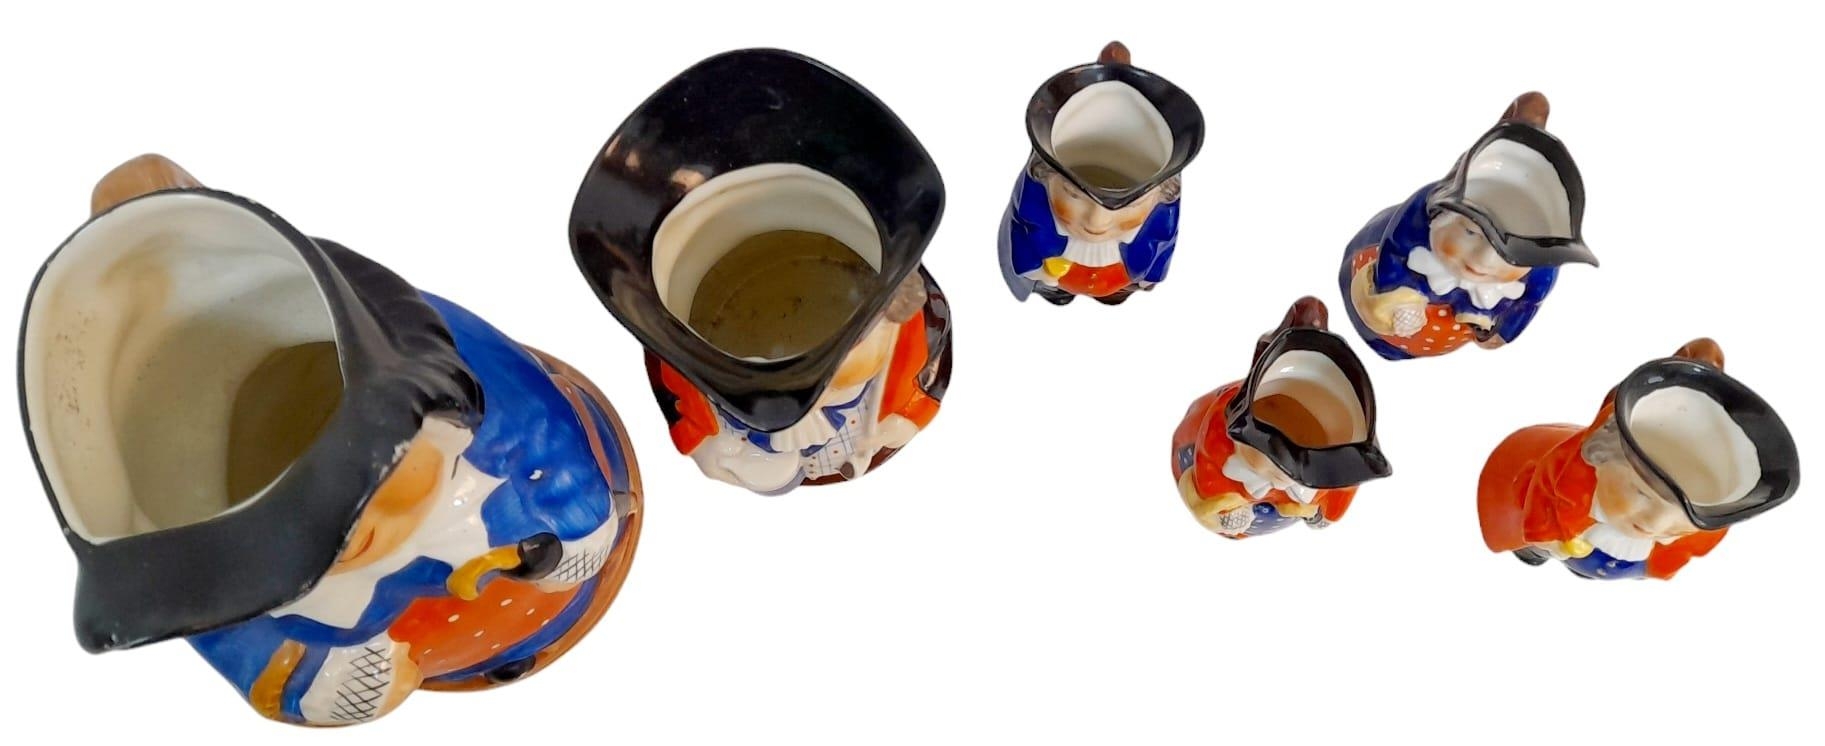 A COLLECTION OF UNUSUAL ROYAL WORCESTER TOBY JUGS HALF BEING FEMALE , 2 LARGE PLUS 4 SMALLER JUGS ( - Image 4 of 6